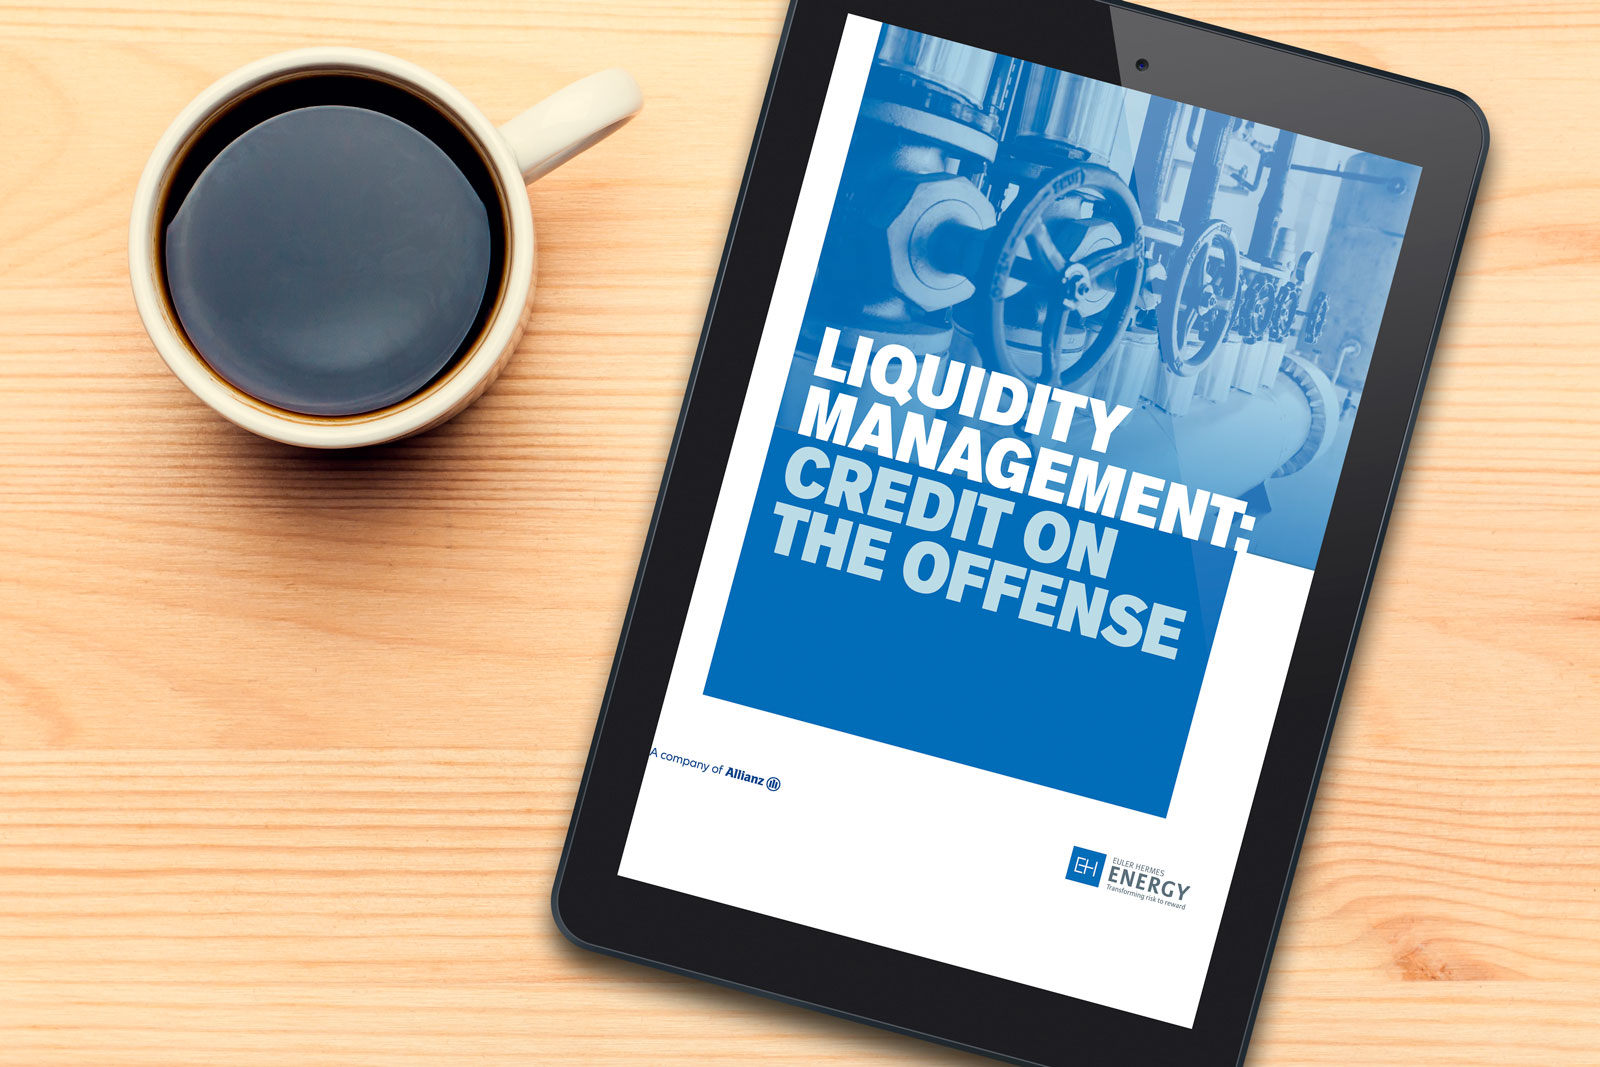 Liquidity Management: Credit on the Offense